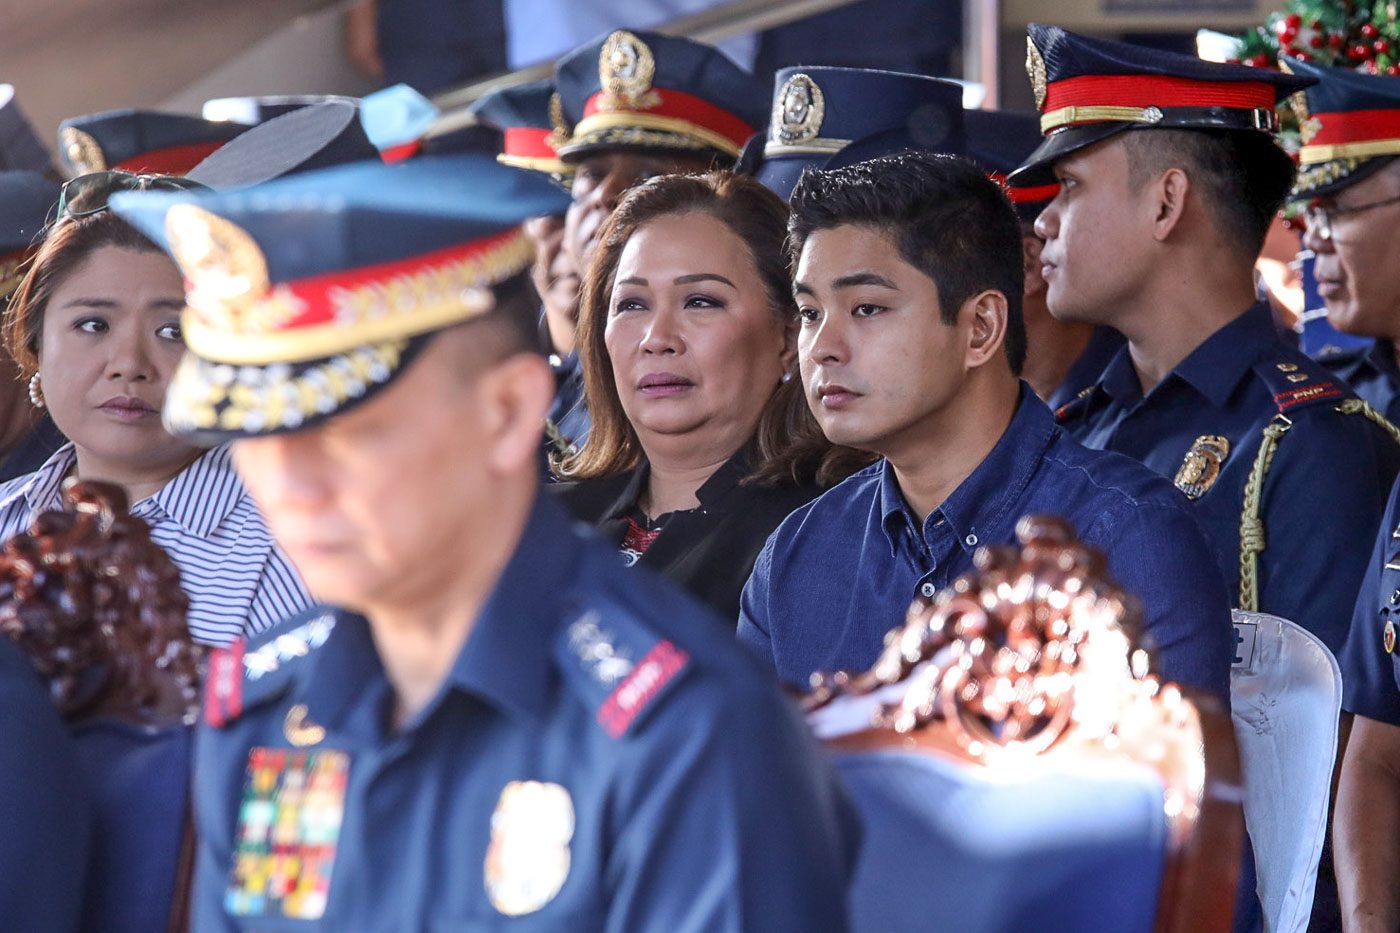 FICTIONAL SHOW, REAL ISSUES. Coco Martin is one of the guests during the flag raising ceremony at the PNP headquarters in Camp Crame. Photo by Darren Langit/Rappler 